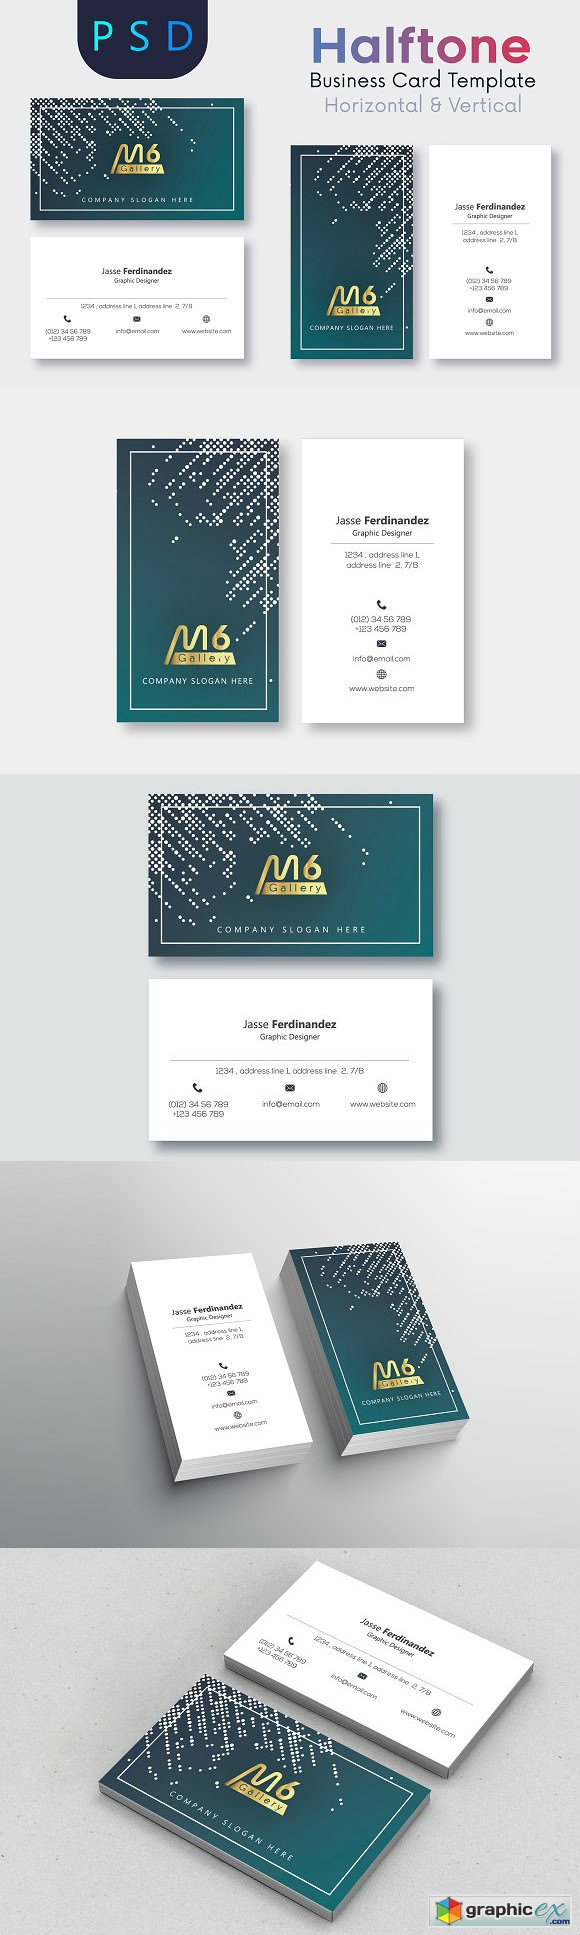 Halftone Business Card Template- S10